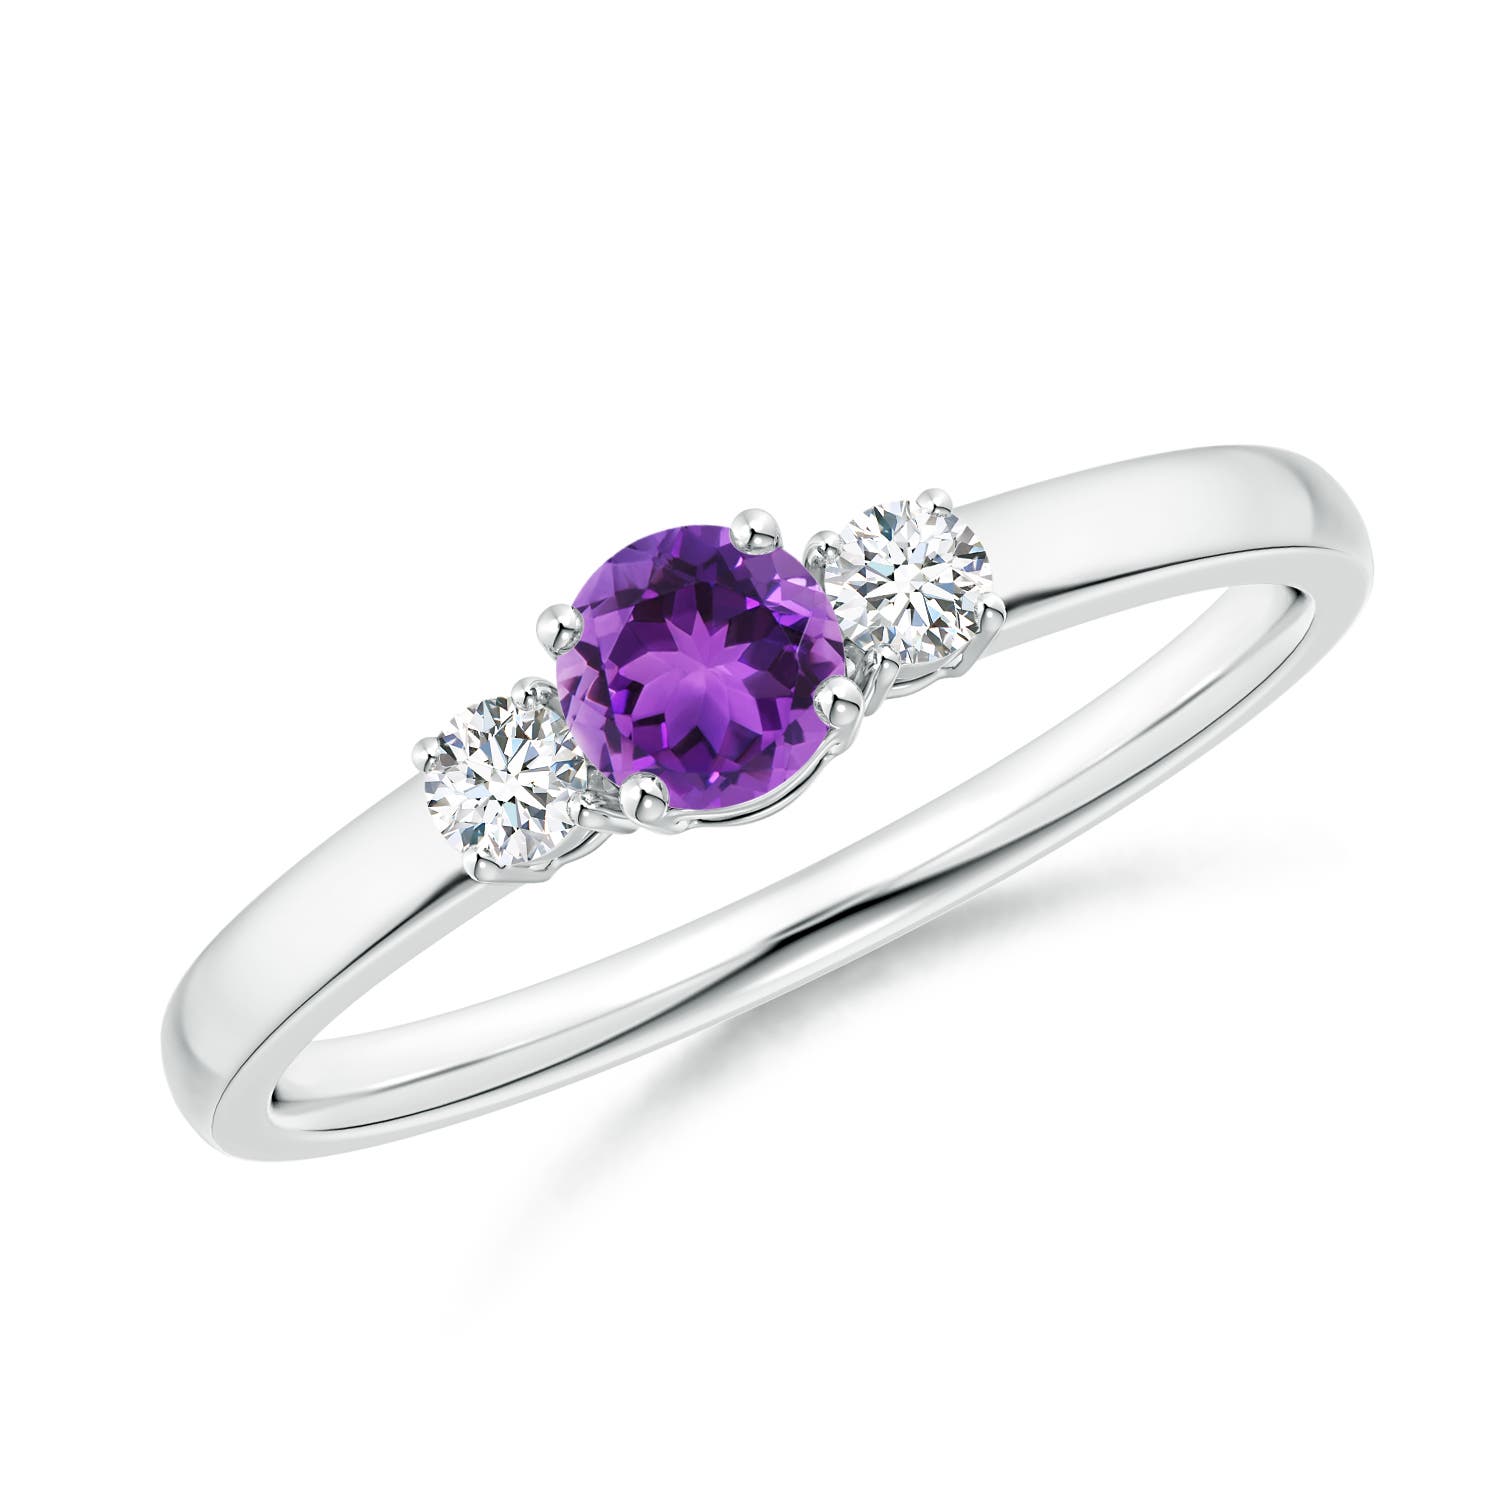 AAA - Amethyst / 0.39 CT / 14 KT White Gold